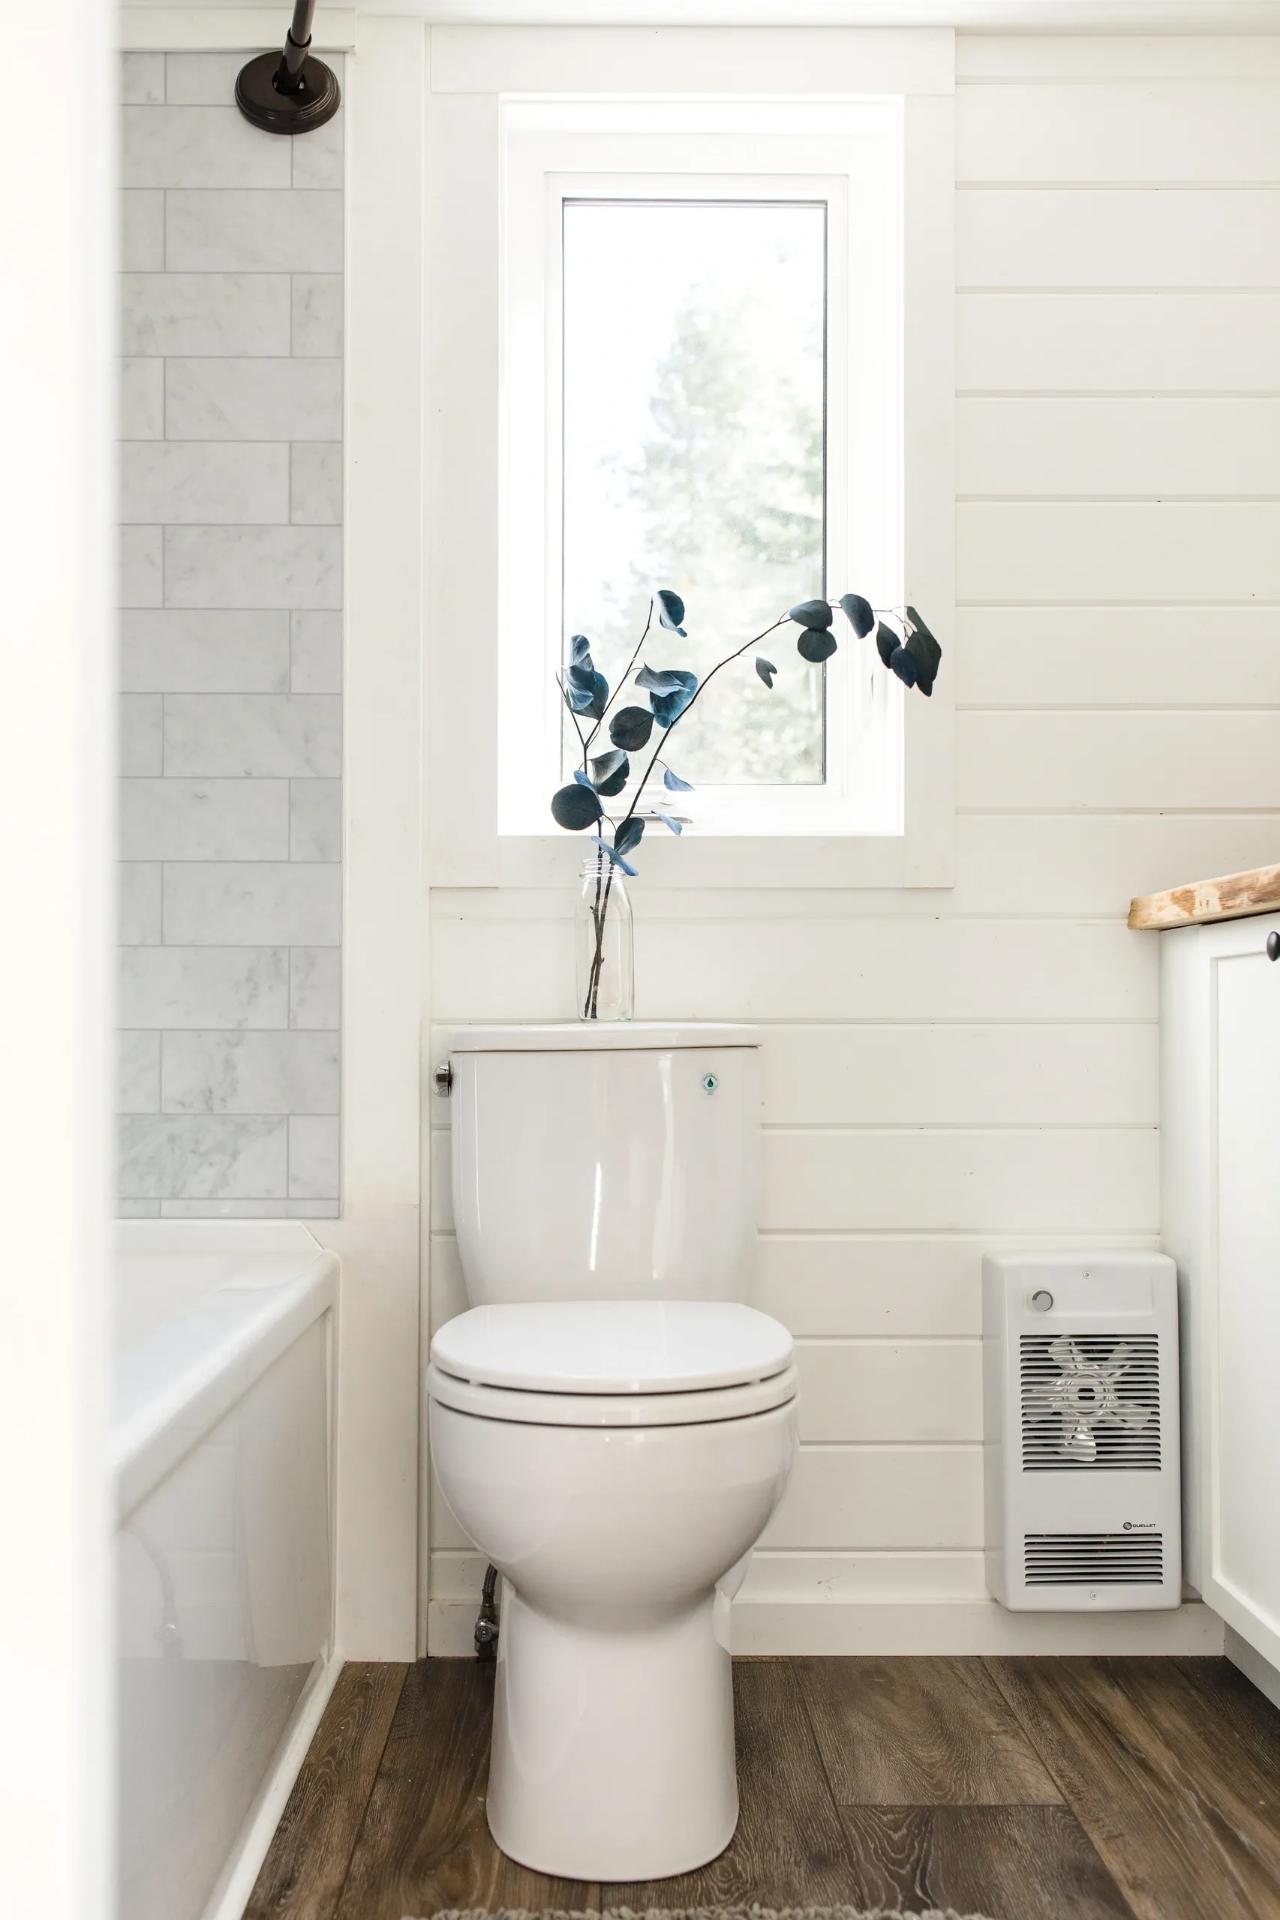 Standard Flush Toilet - Sitka by Canadian Tiny Homes